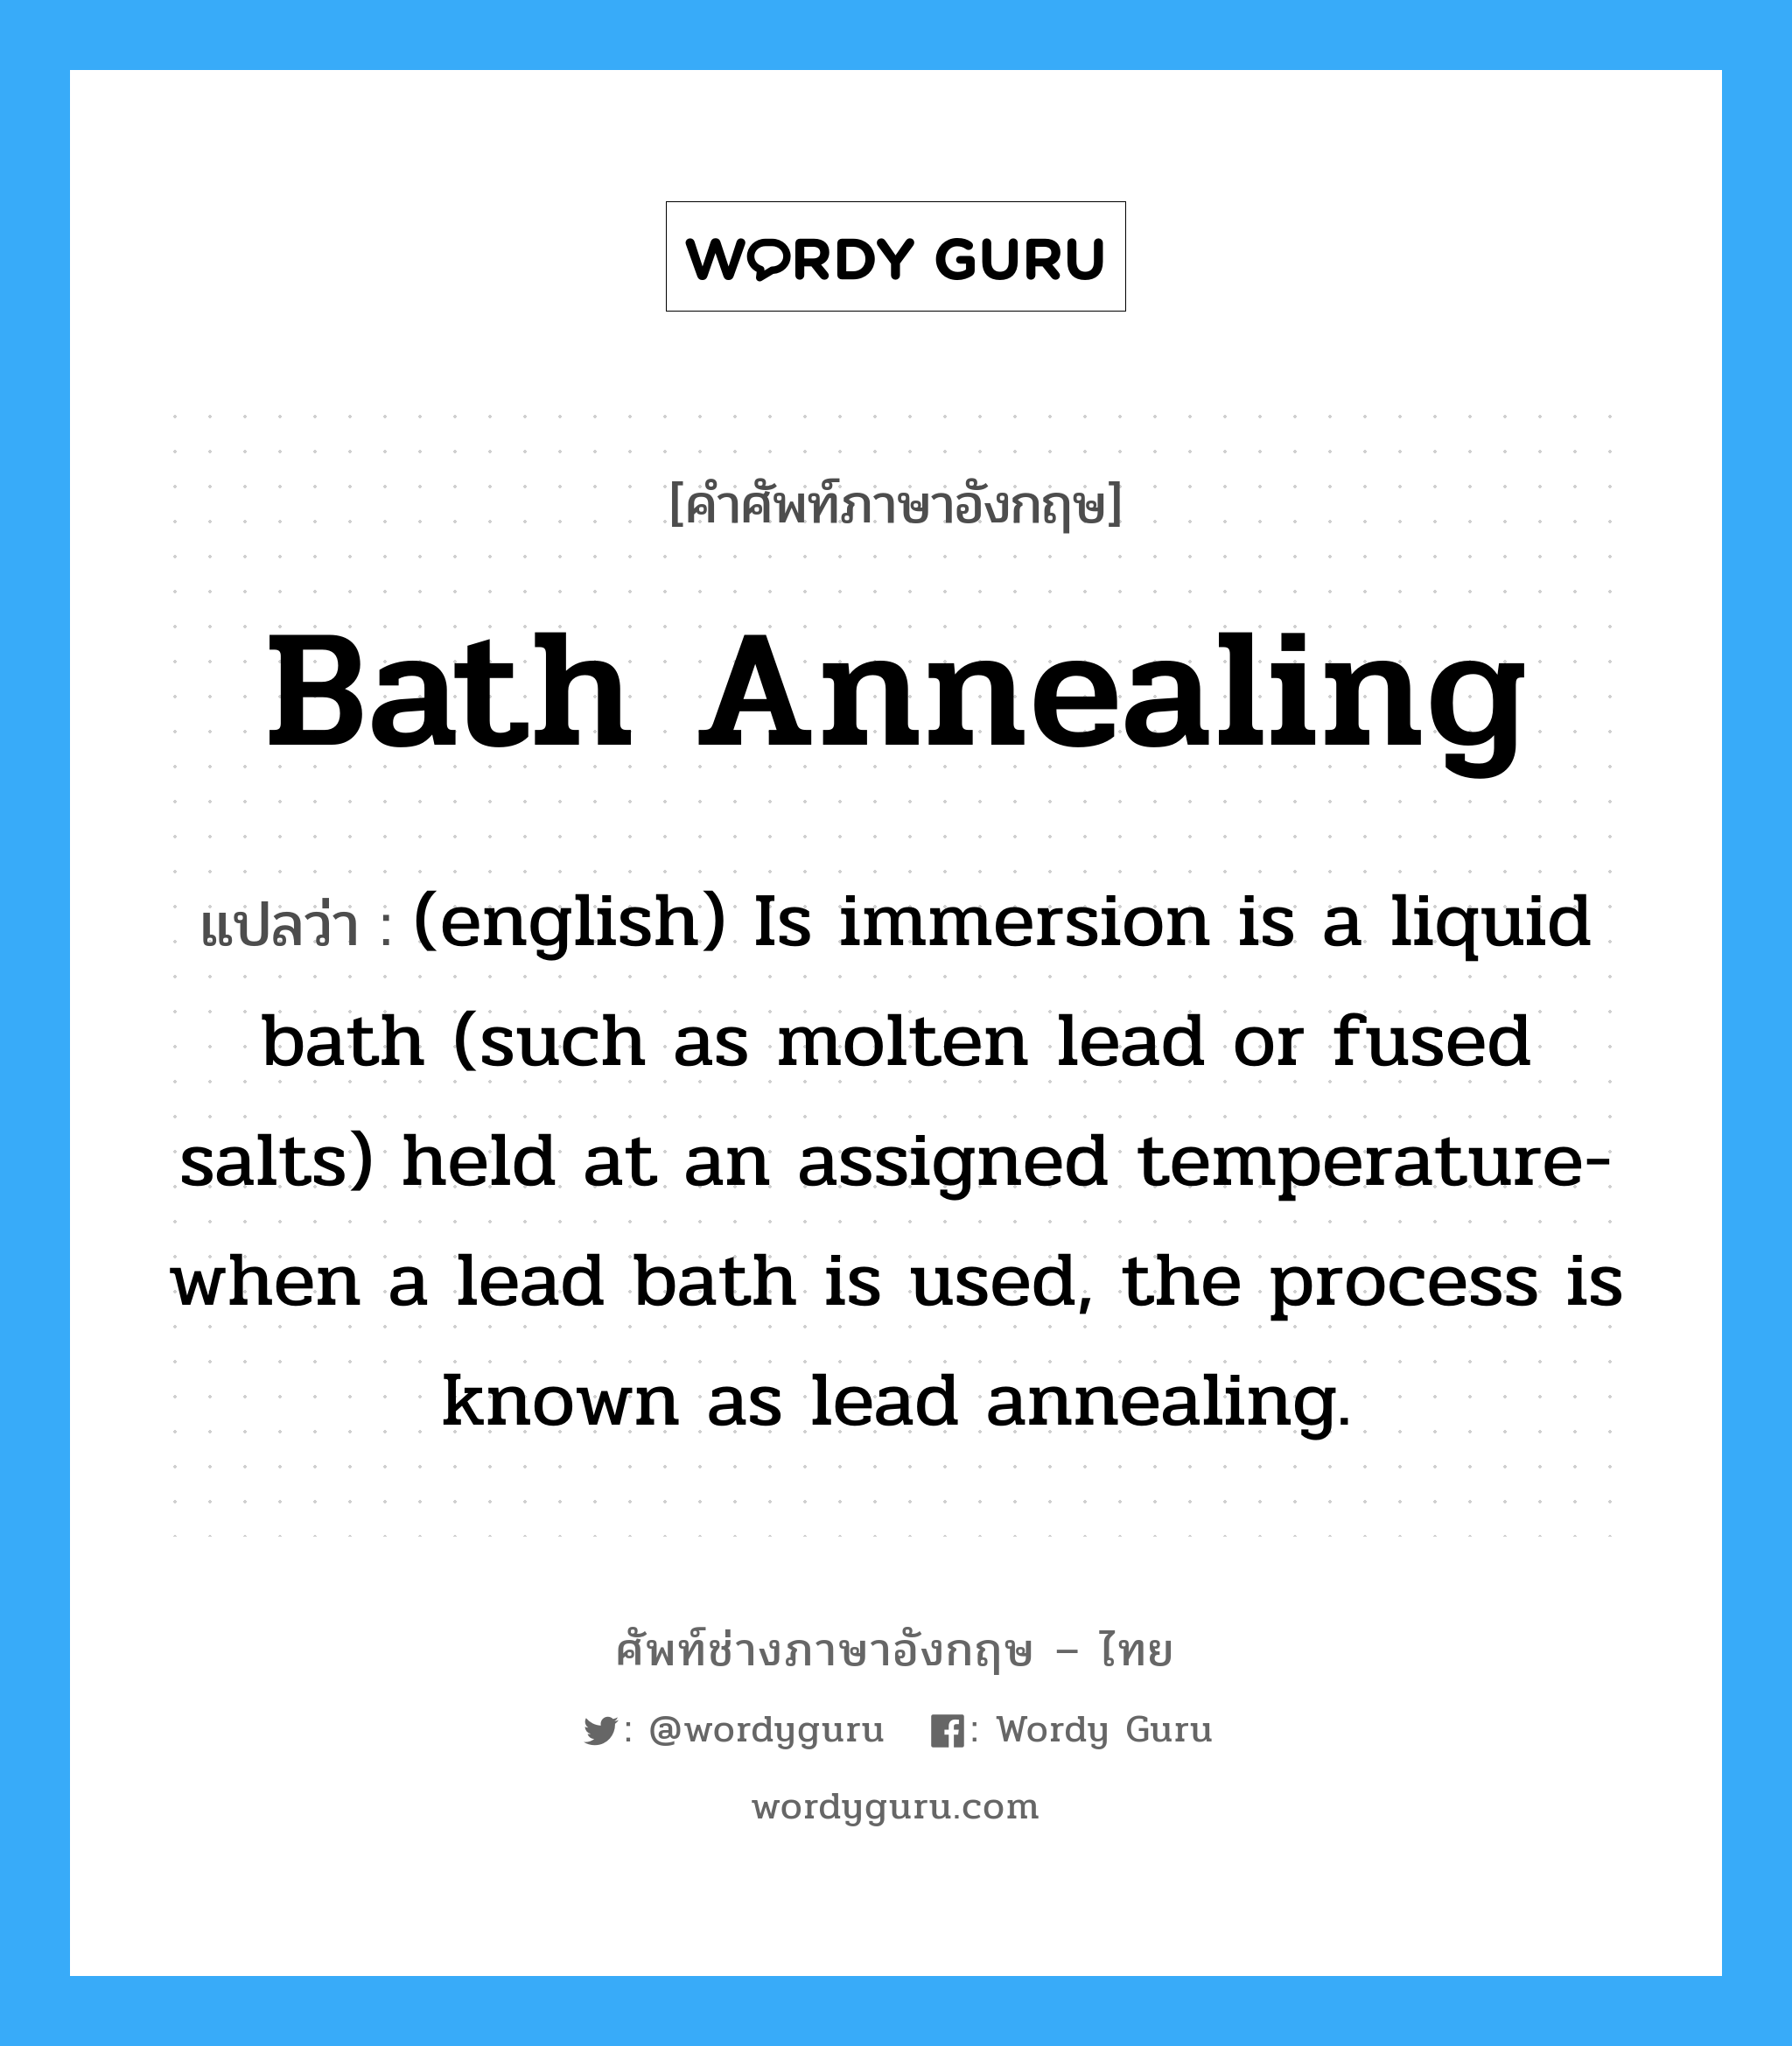 Bath Annealing แปลว่า?, คำศัพท์ช่างภาษาอังกฤษ - ไทย Bath Annealing คำศัพท์ภาษาอังกฤษ Bath Annealing แปลว่า (english) Is immersion is a liquid bath (such as molten lead or fused salts) held at an assigned temperature-when a lead bath is used, the process is known as lead annealing.